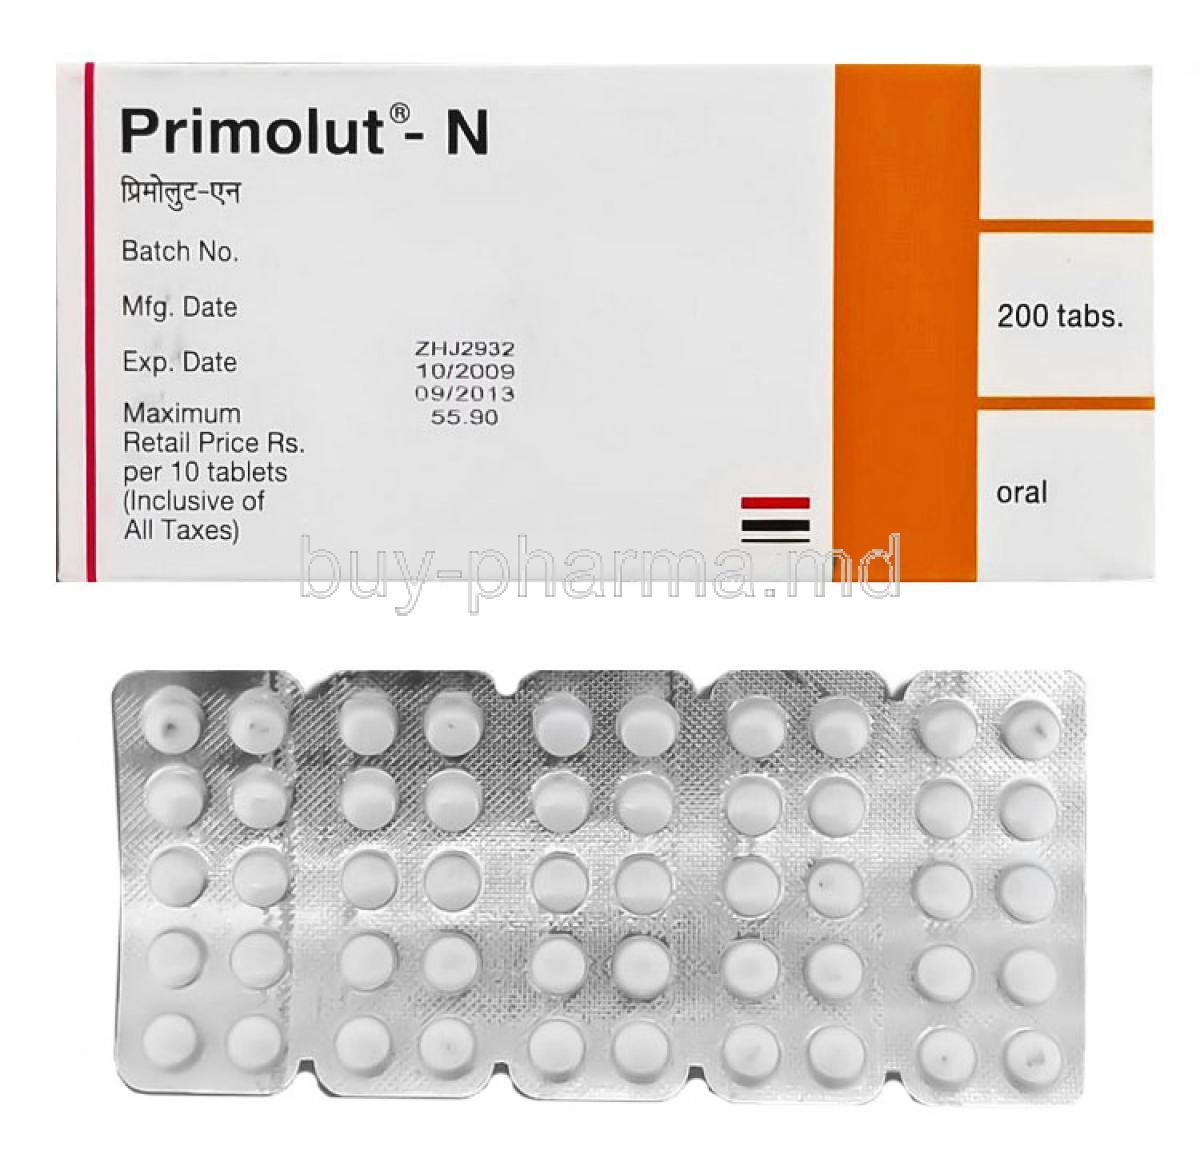 Primolut N, Norethisterone box and tablets